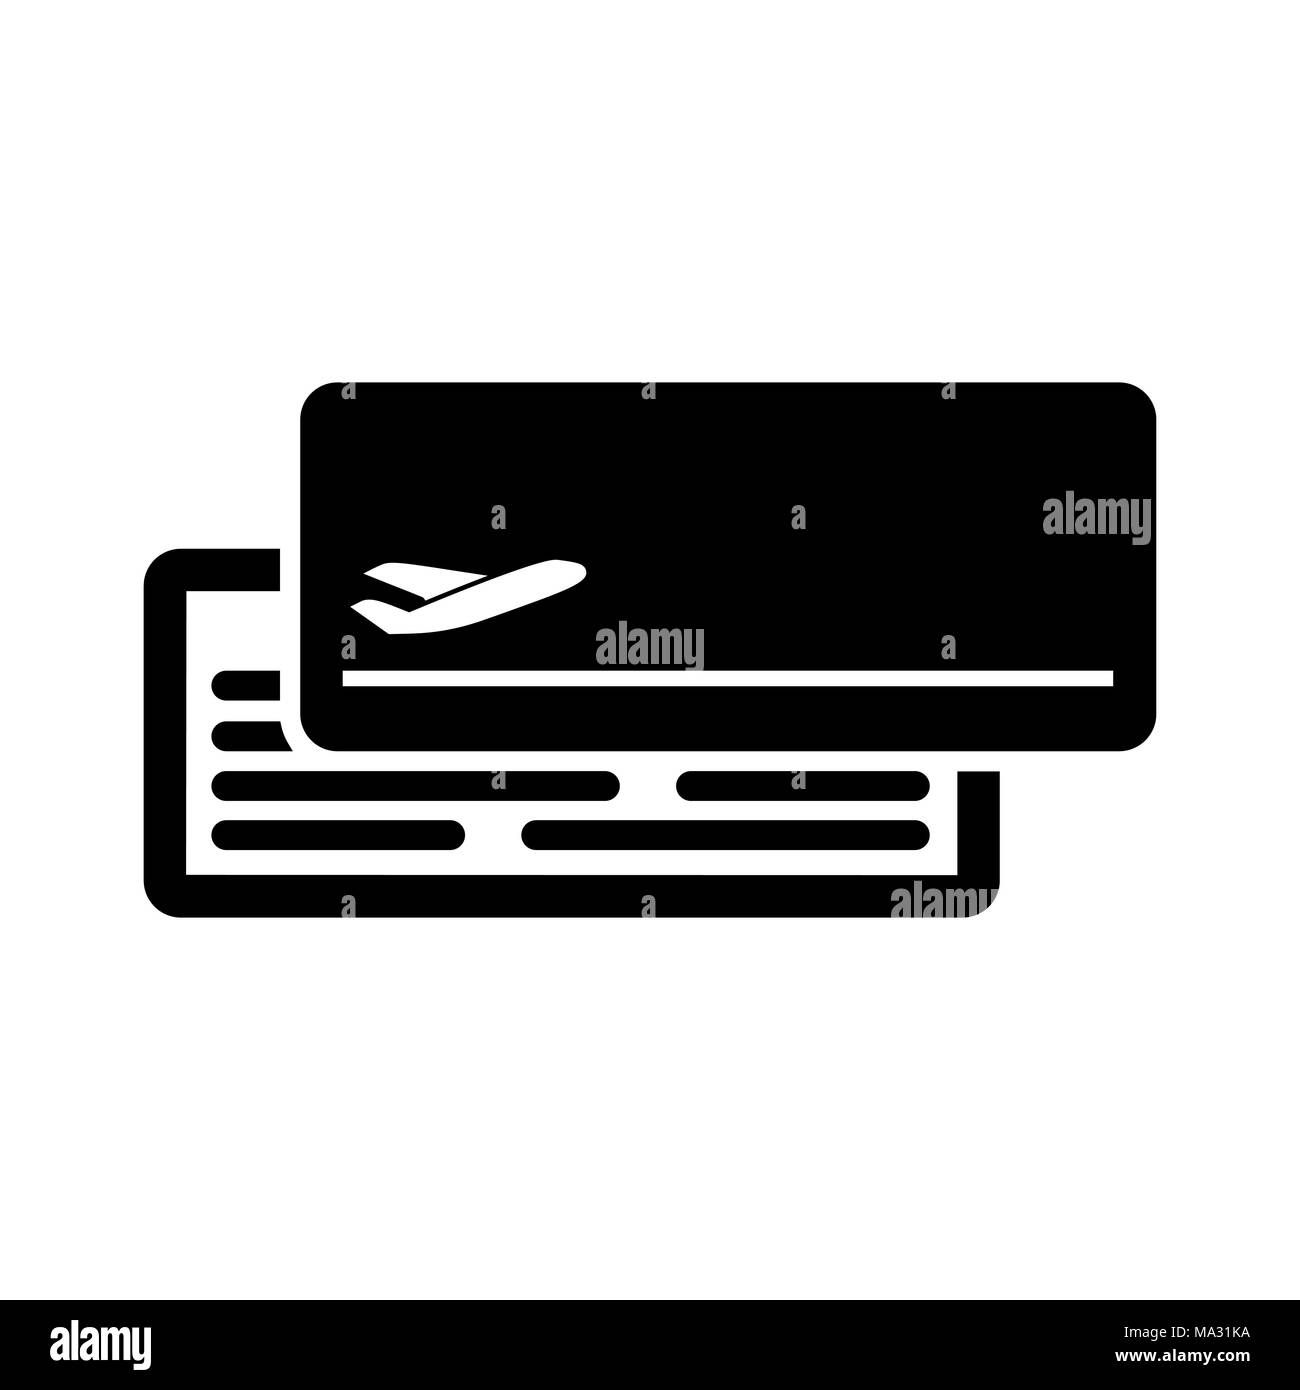 Plane ticket icon flat style simple illustration. Boarding pass. Stock Vector